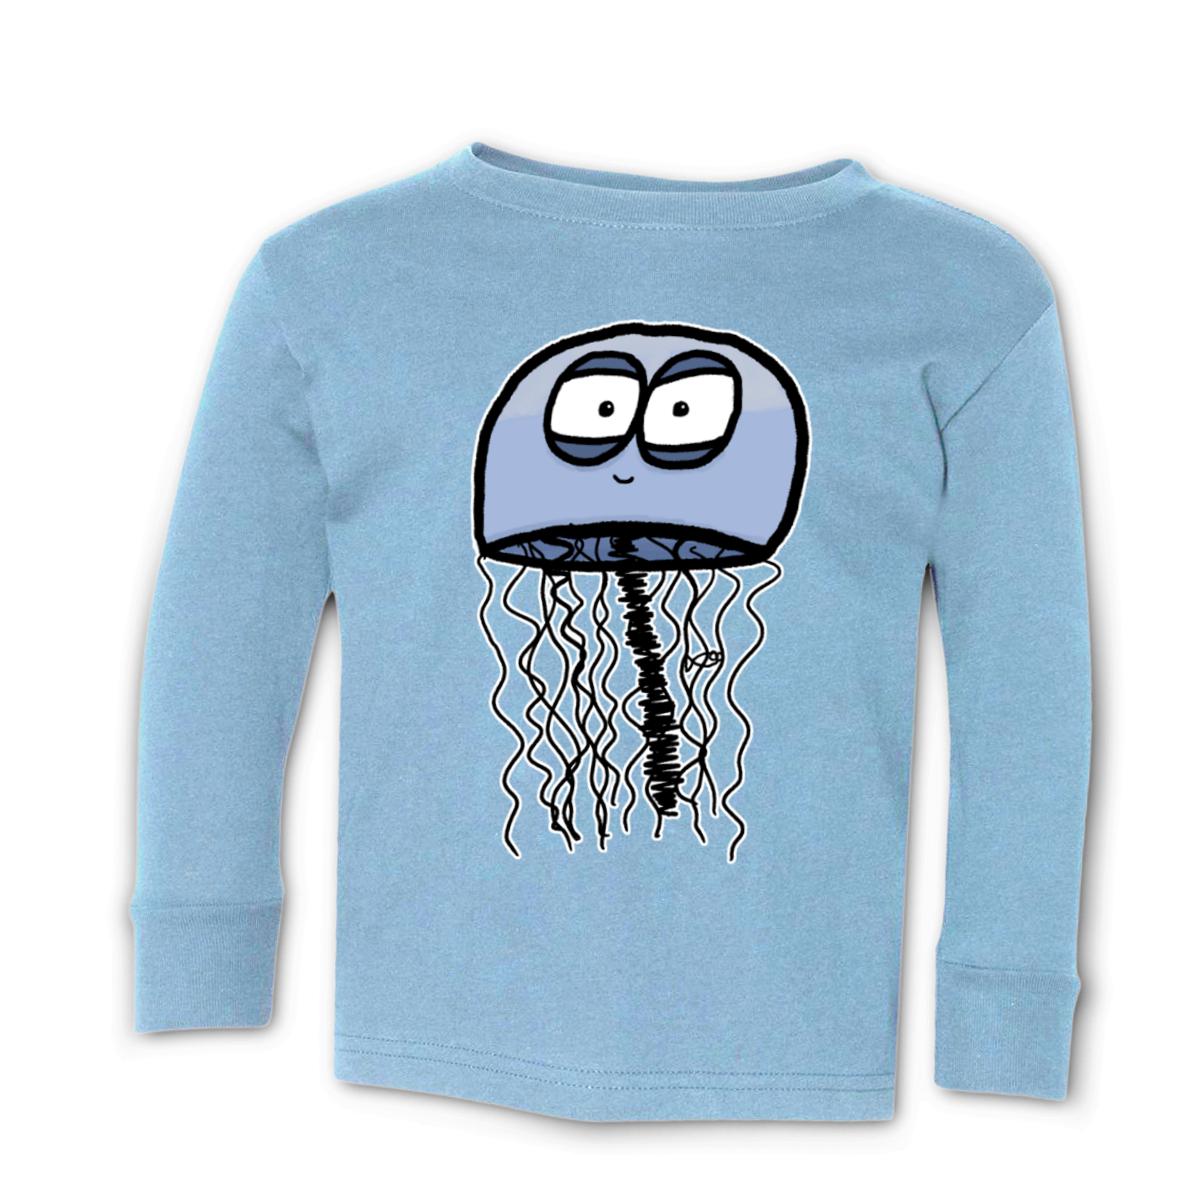 Jelly Fish Toddler Long Sleeve Tee 4T light-blue